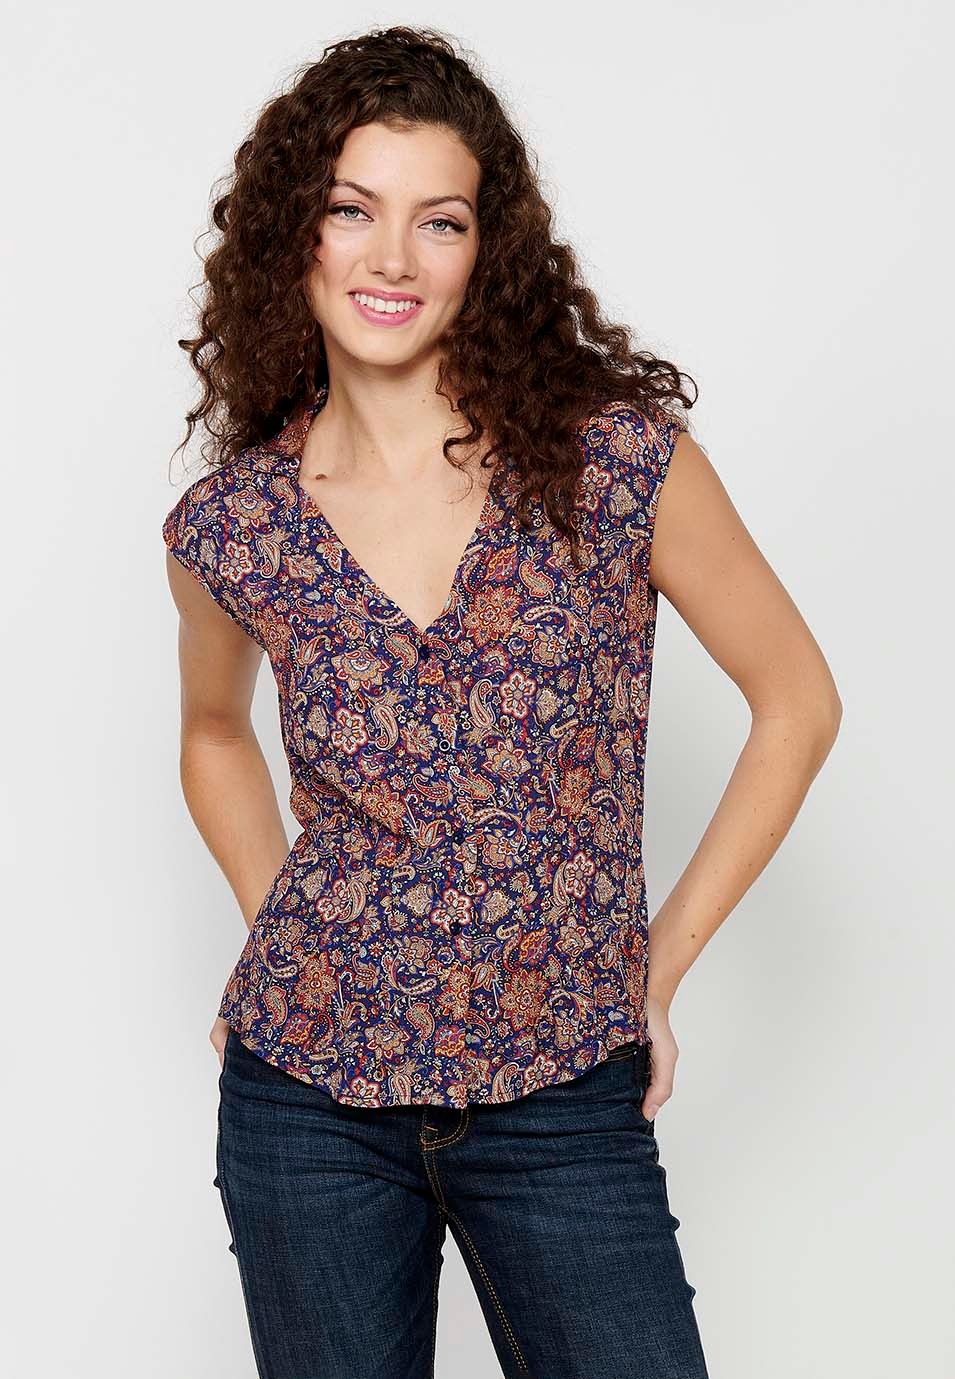 Sleeveless Blouse with Shirt Style and Button Front Closure and Multicolor Floral Print for Women